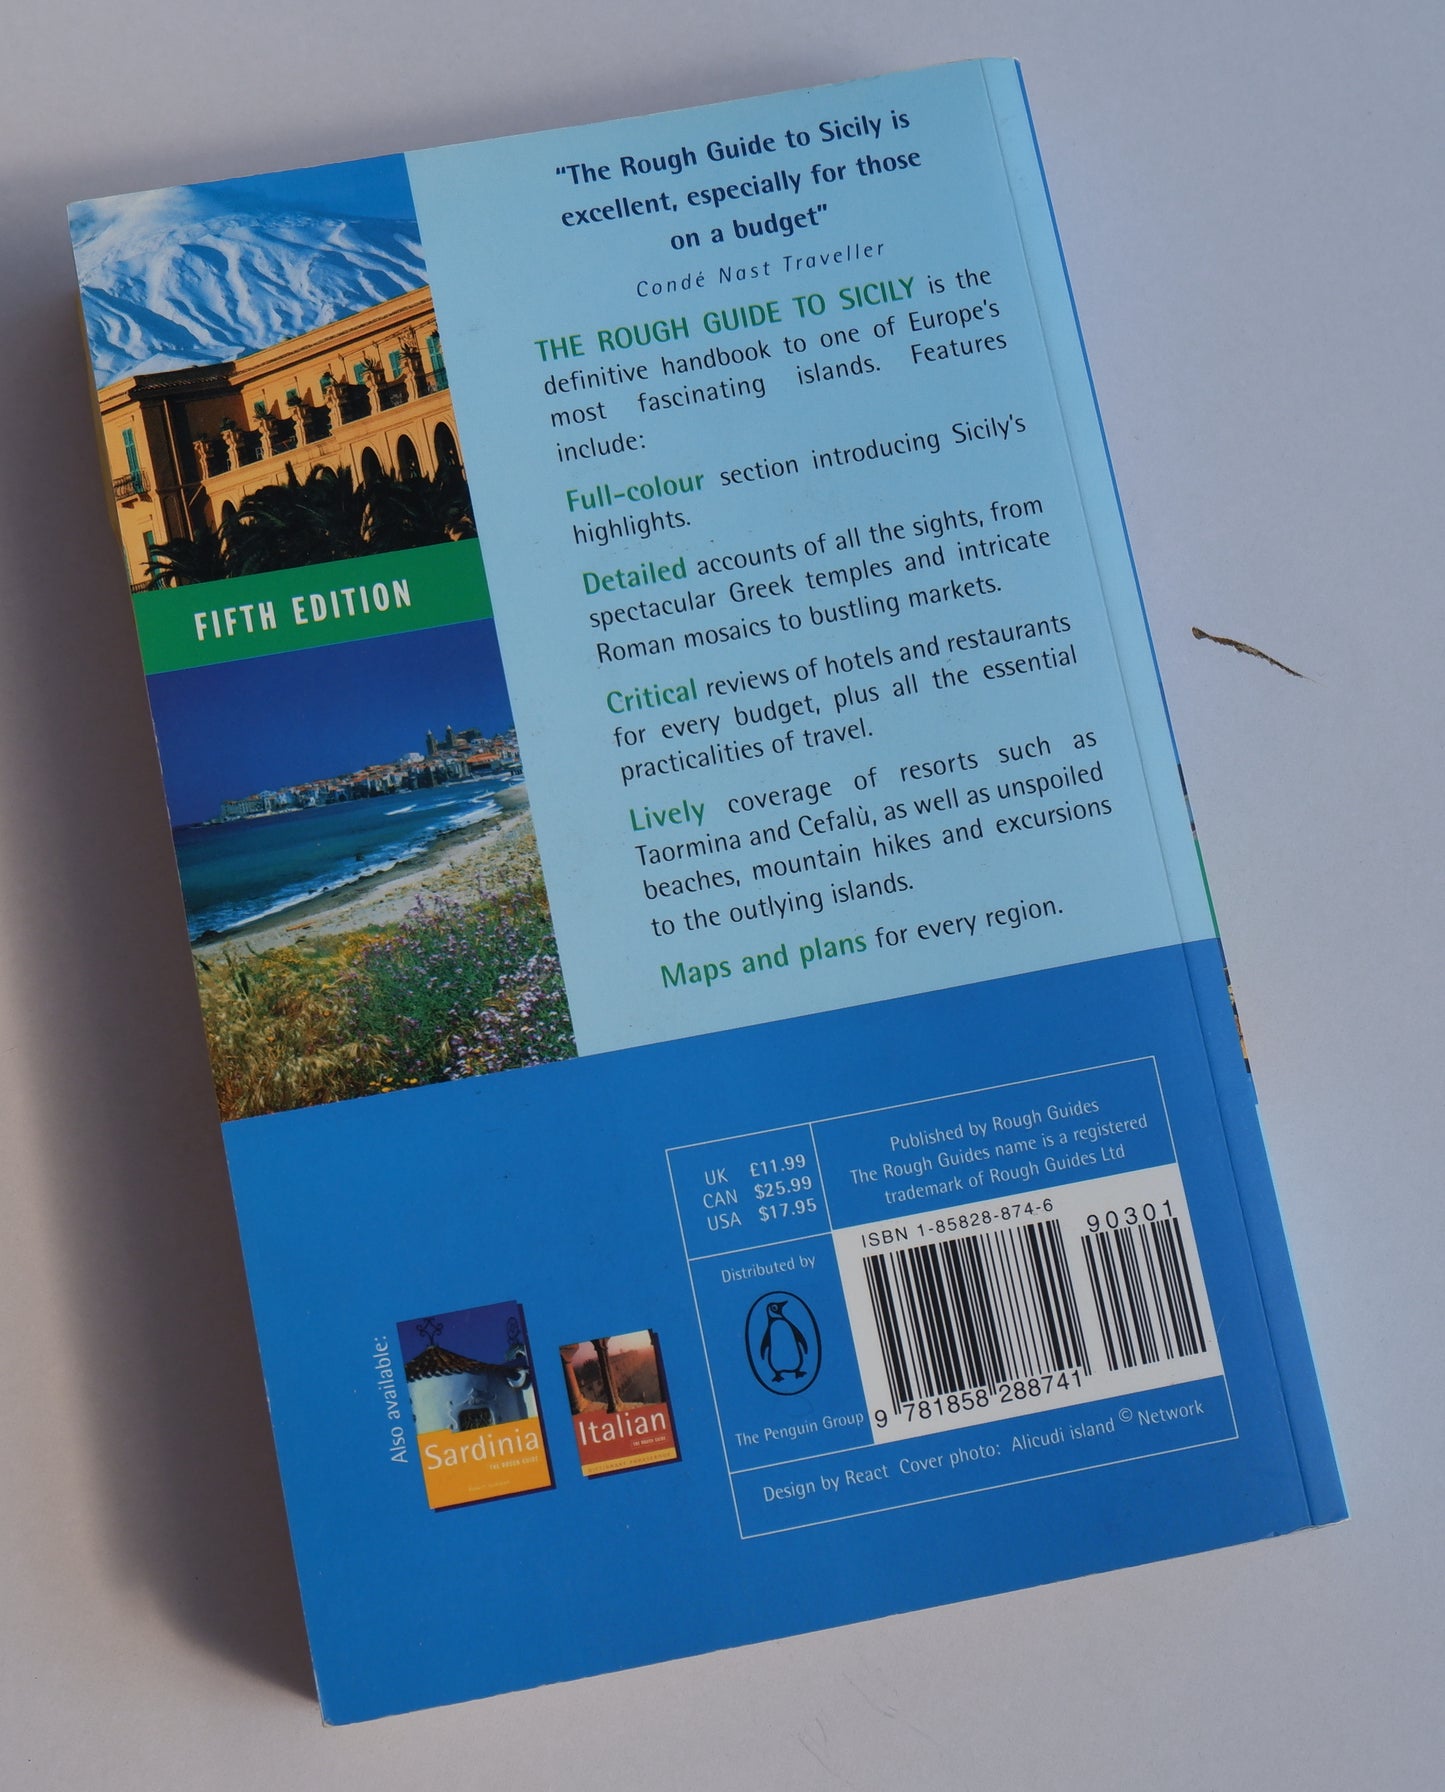 The Rough Guide to Sicily - Fifth Edition